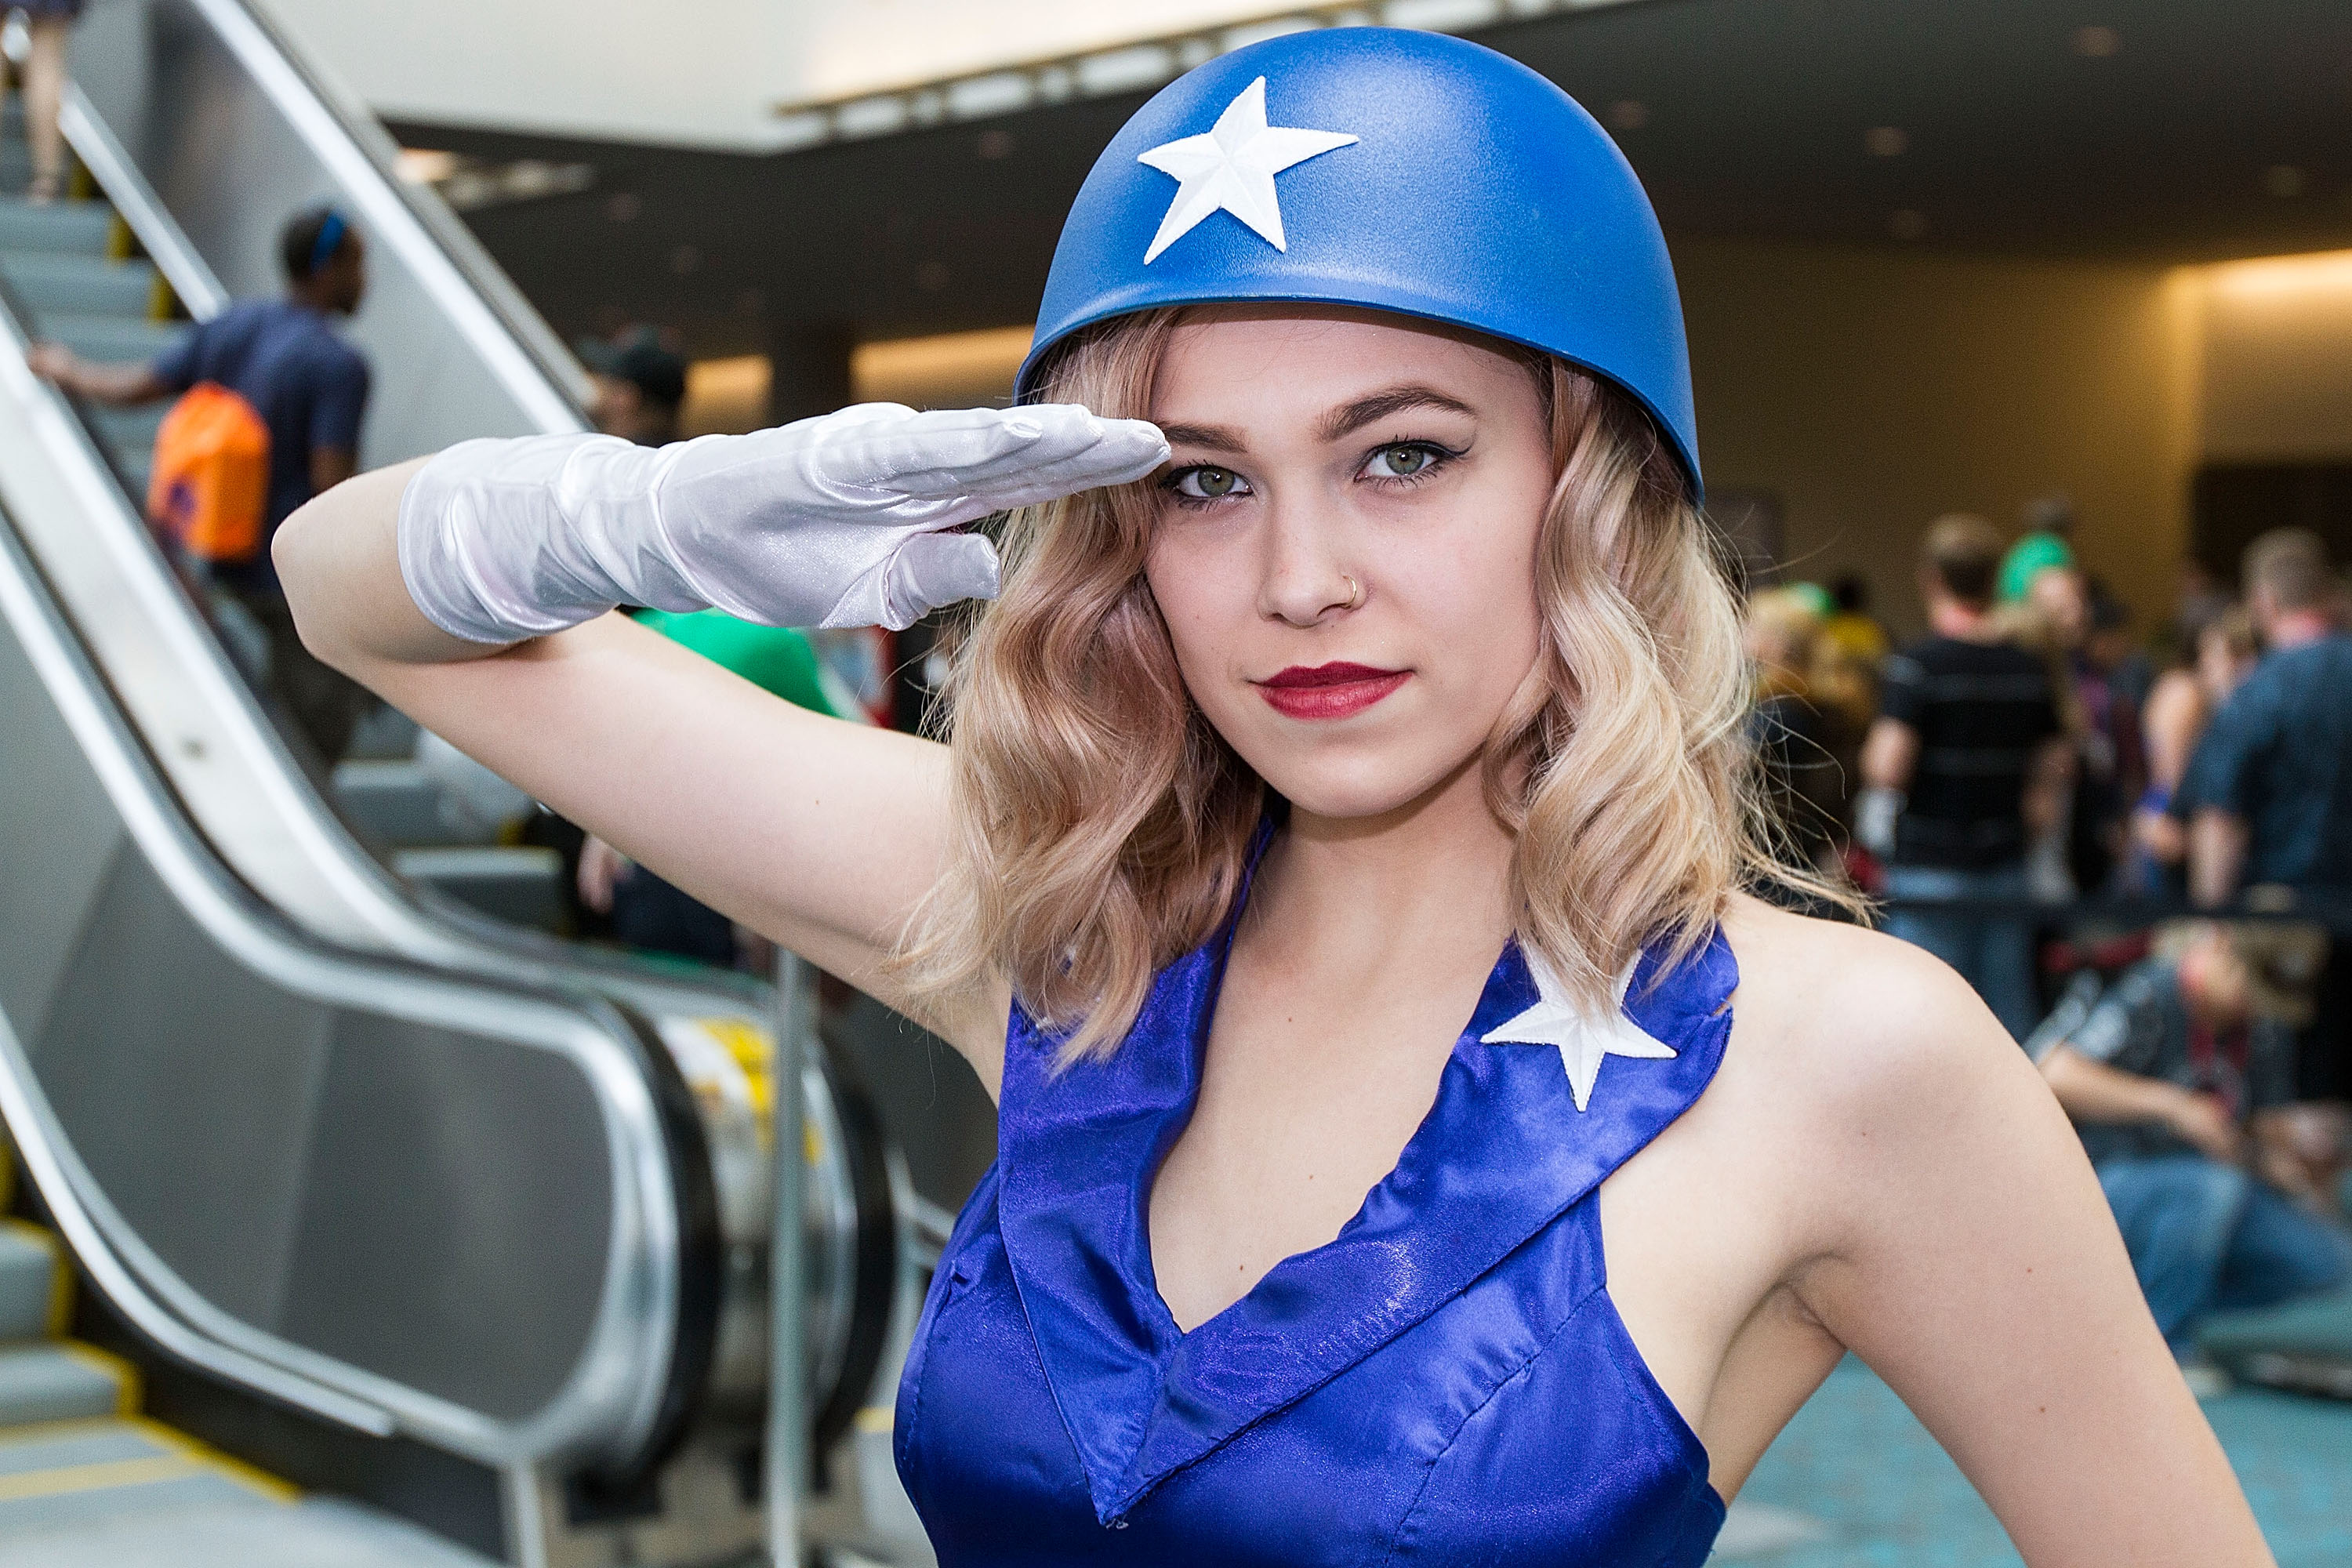 Costumed fan Alana Waffles attends Comic-Con International at San Diego Convention Center on July 27, 2014 in San Diego.